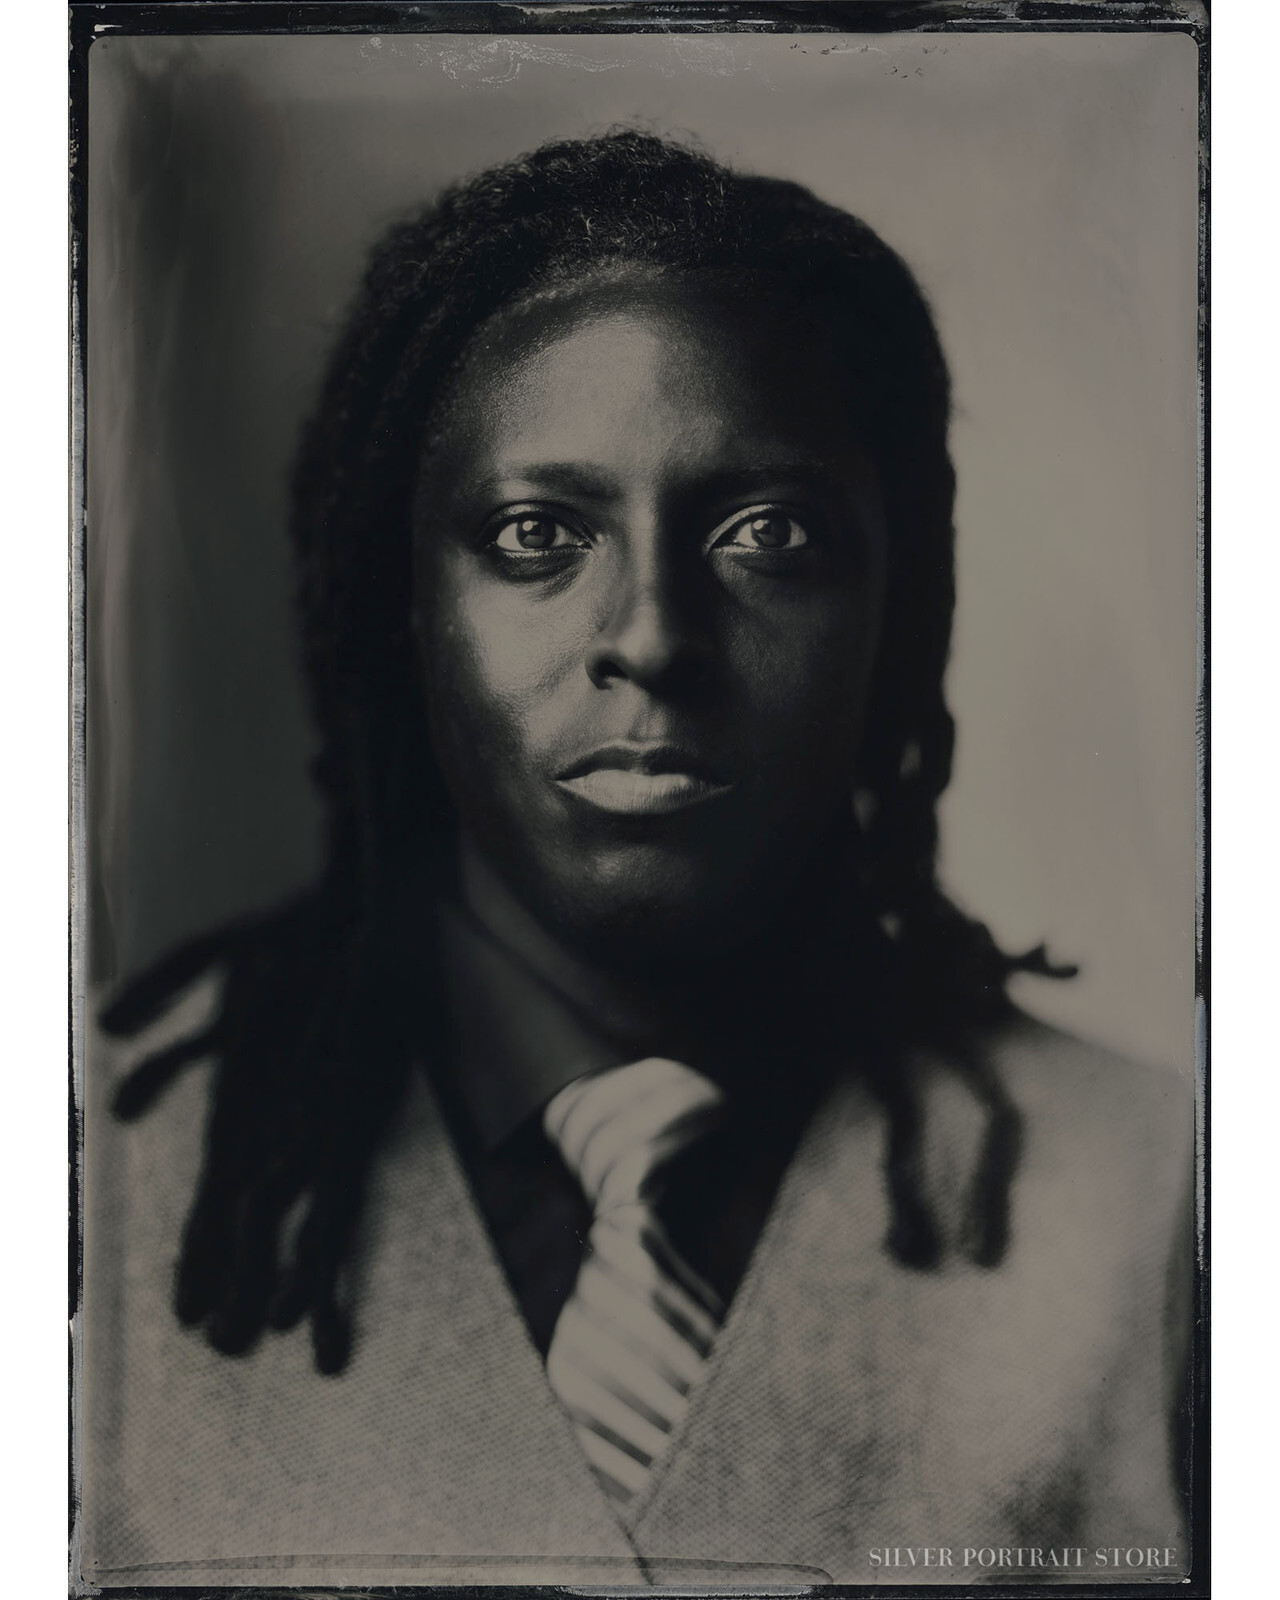 Rocky-Silver Portrait Store-scan from Wet plate collodion-Tintype 13 x 18 cm.